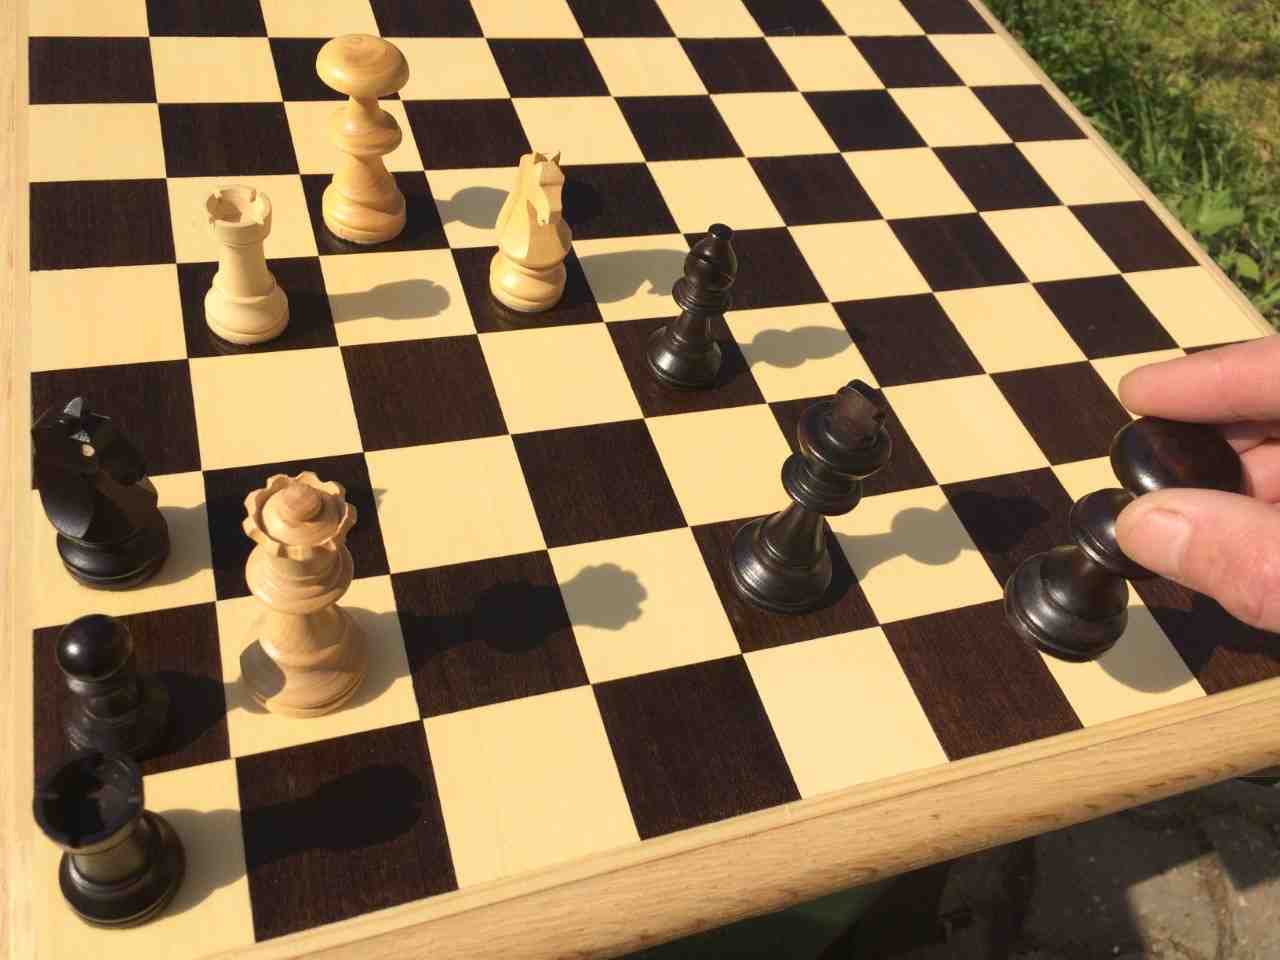 Devingt Chess at play